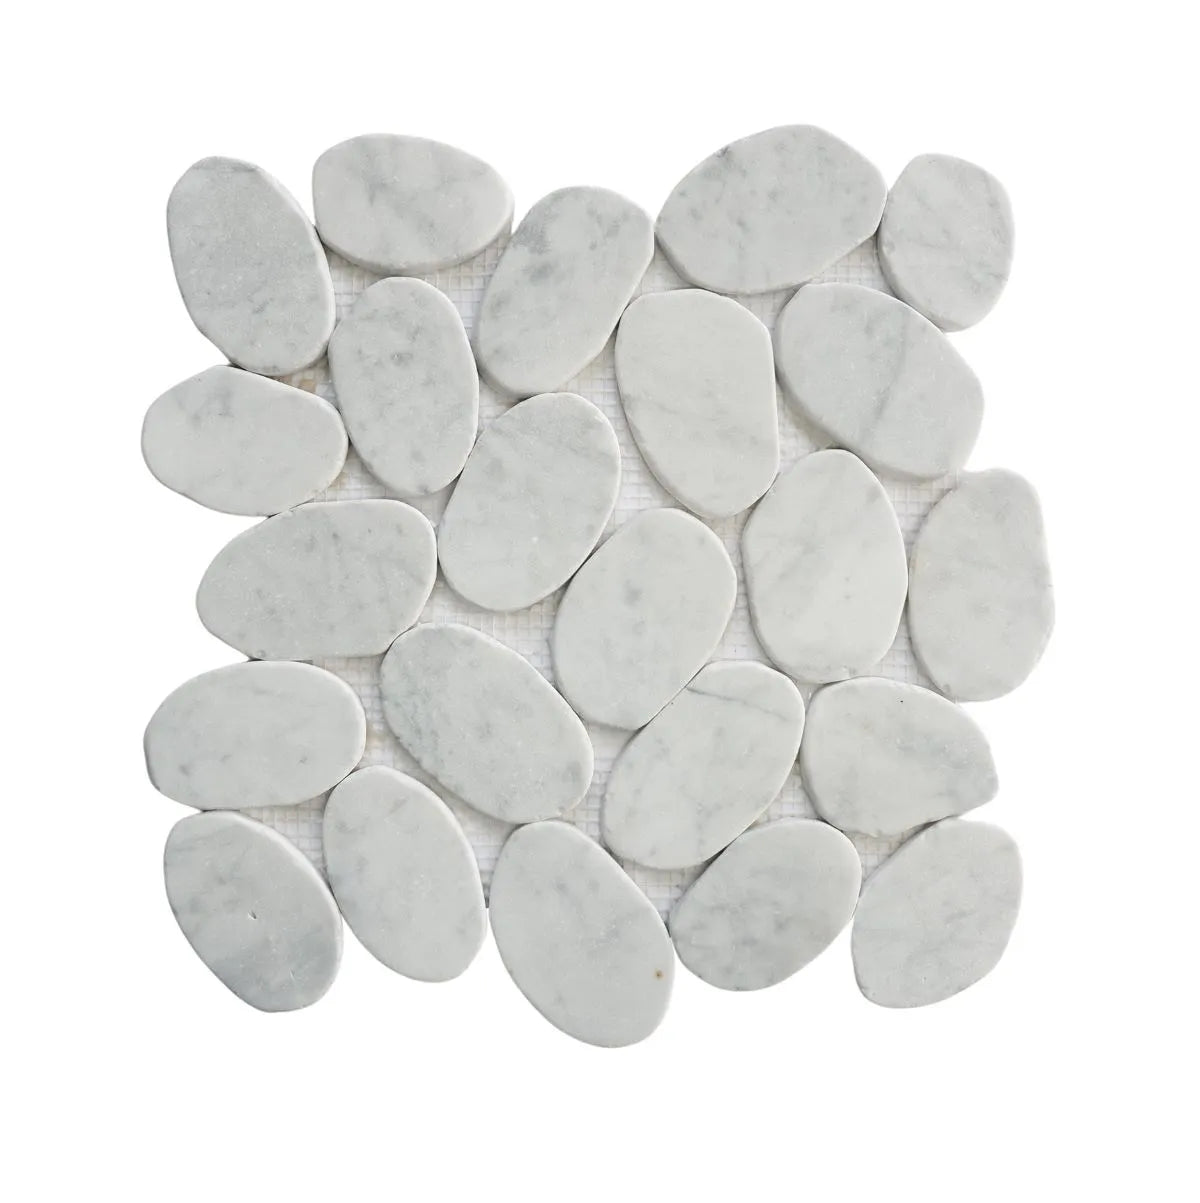 Slice carrara pebble tile sample without grout